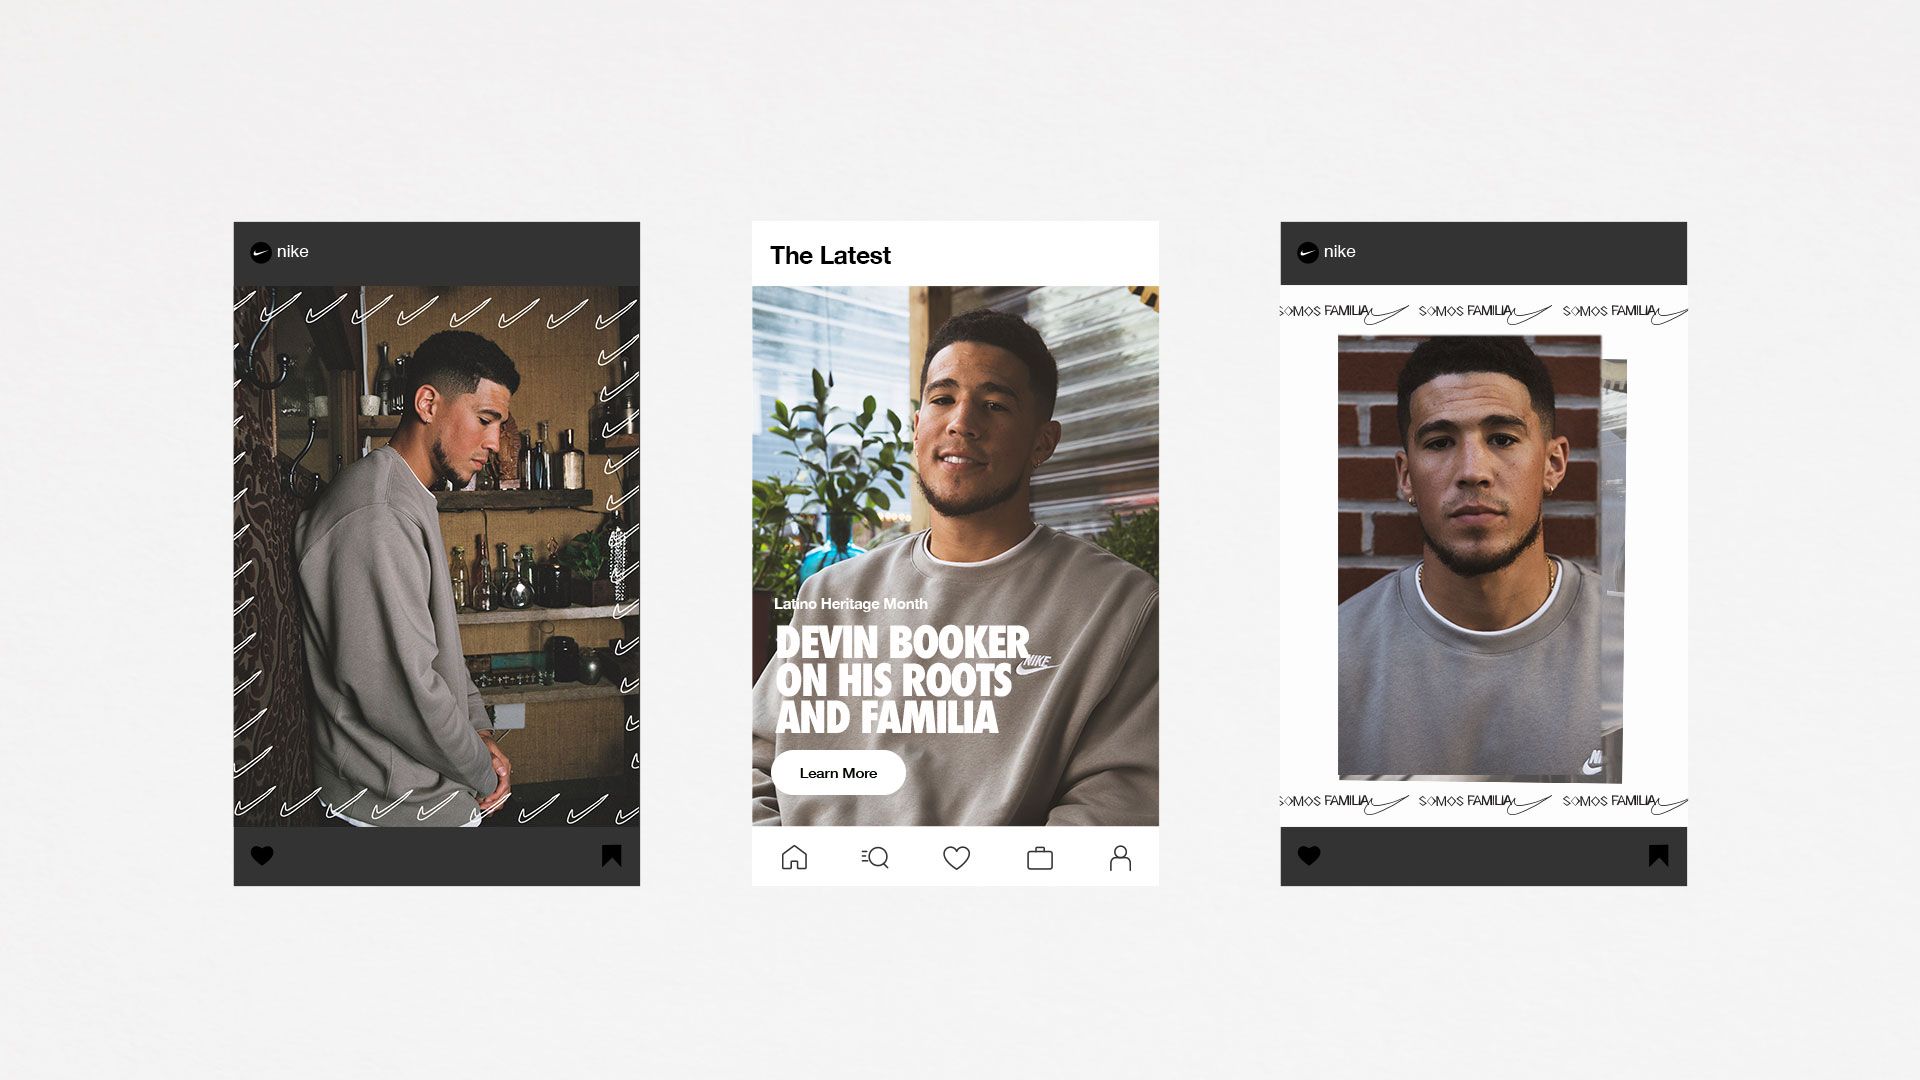 Instagram posts from @nike of Devin Booker on his roots and familia